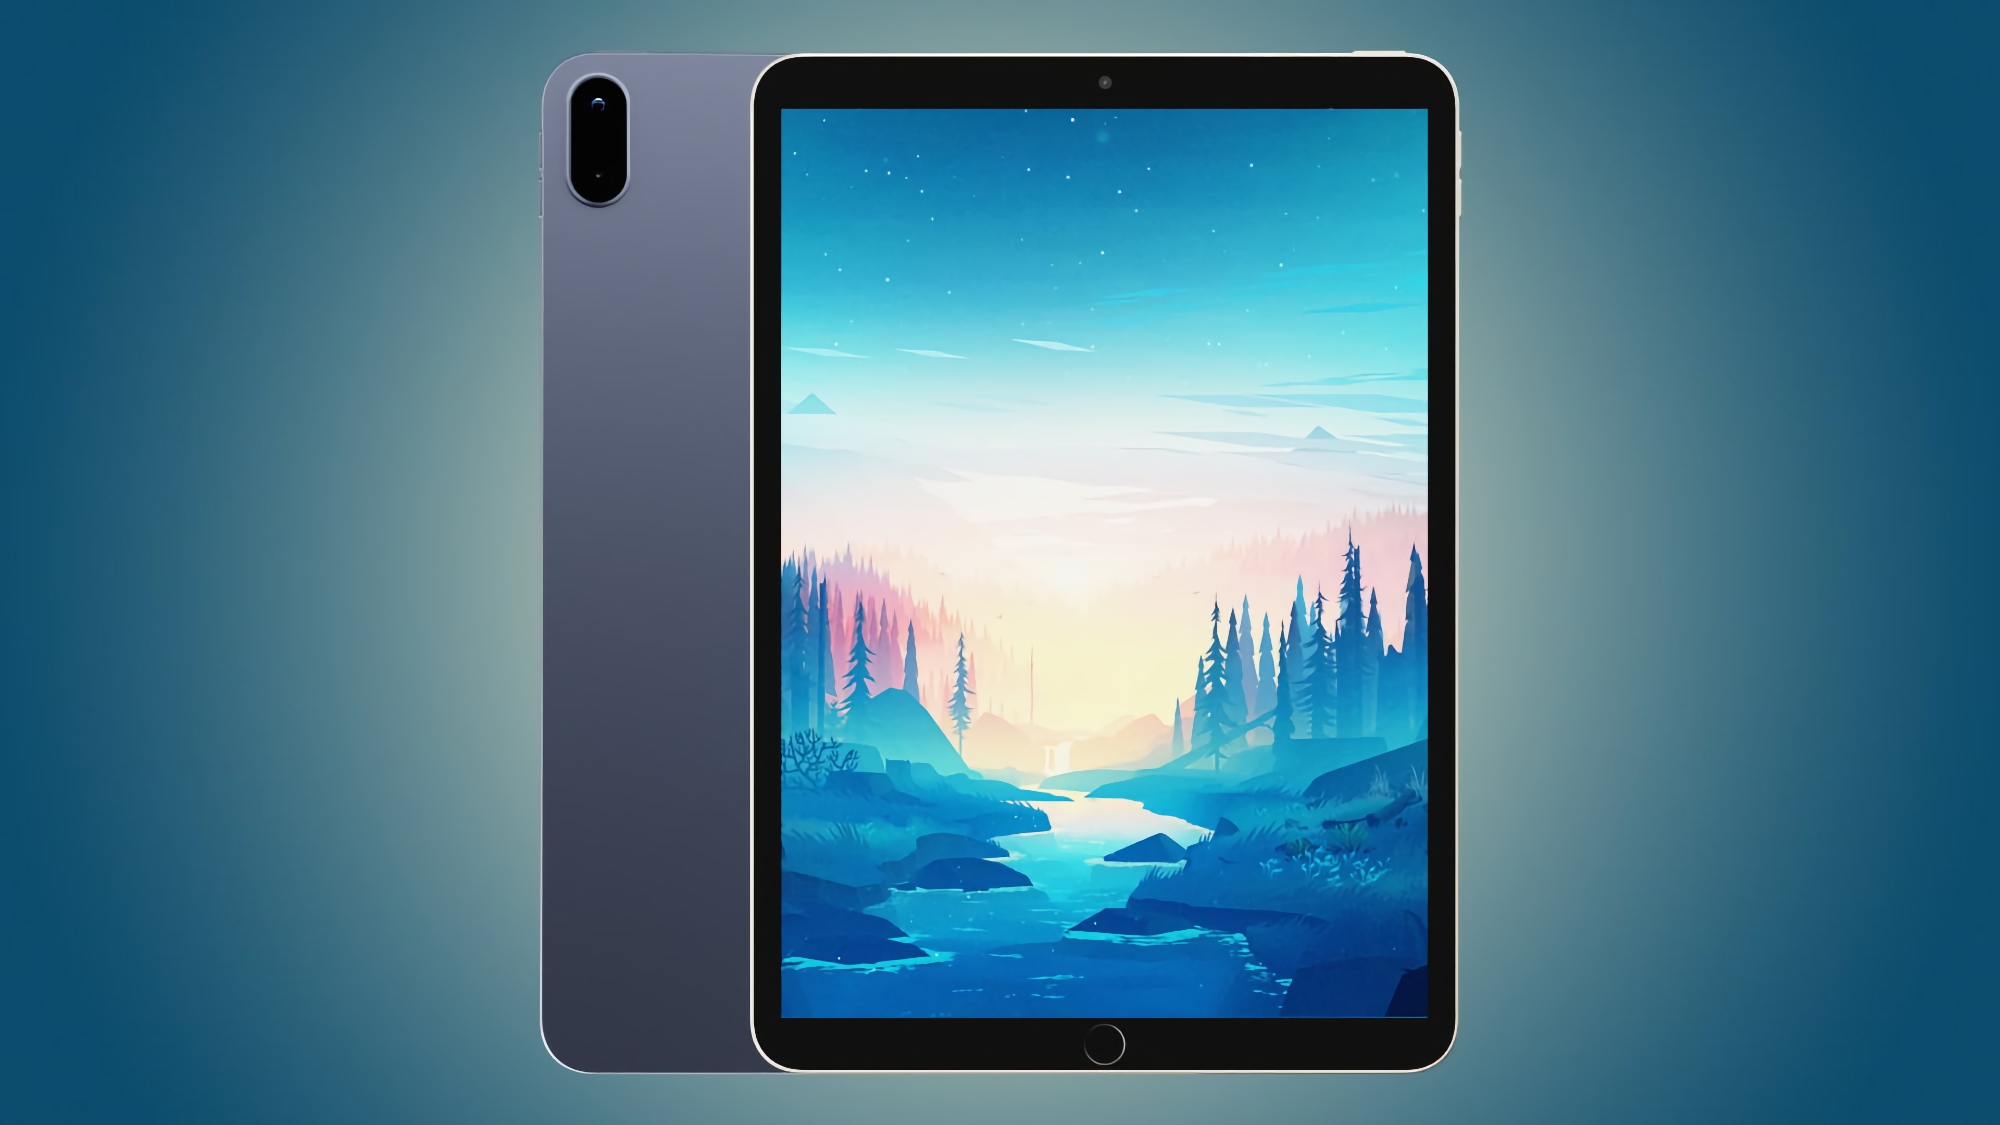 DigiTimes: Apple launched mass production of a new budget iPad